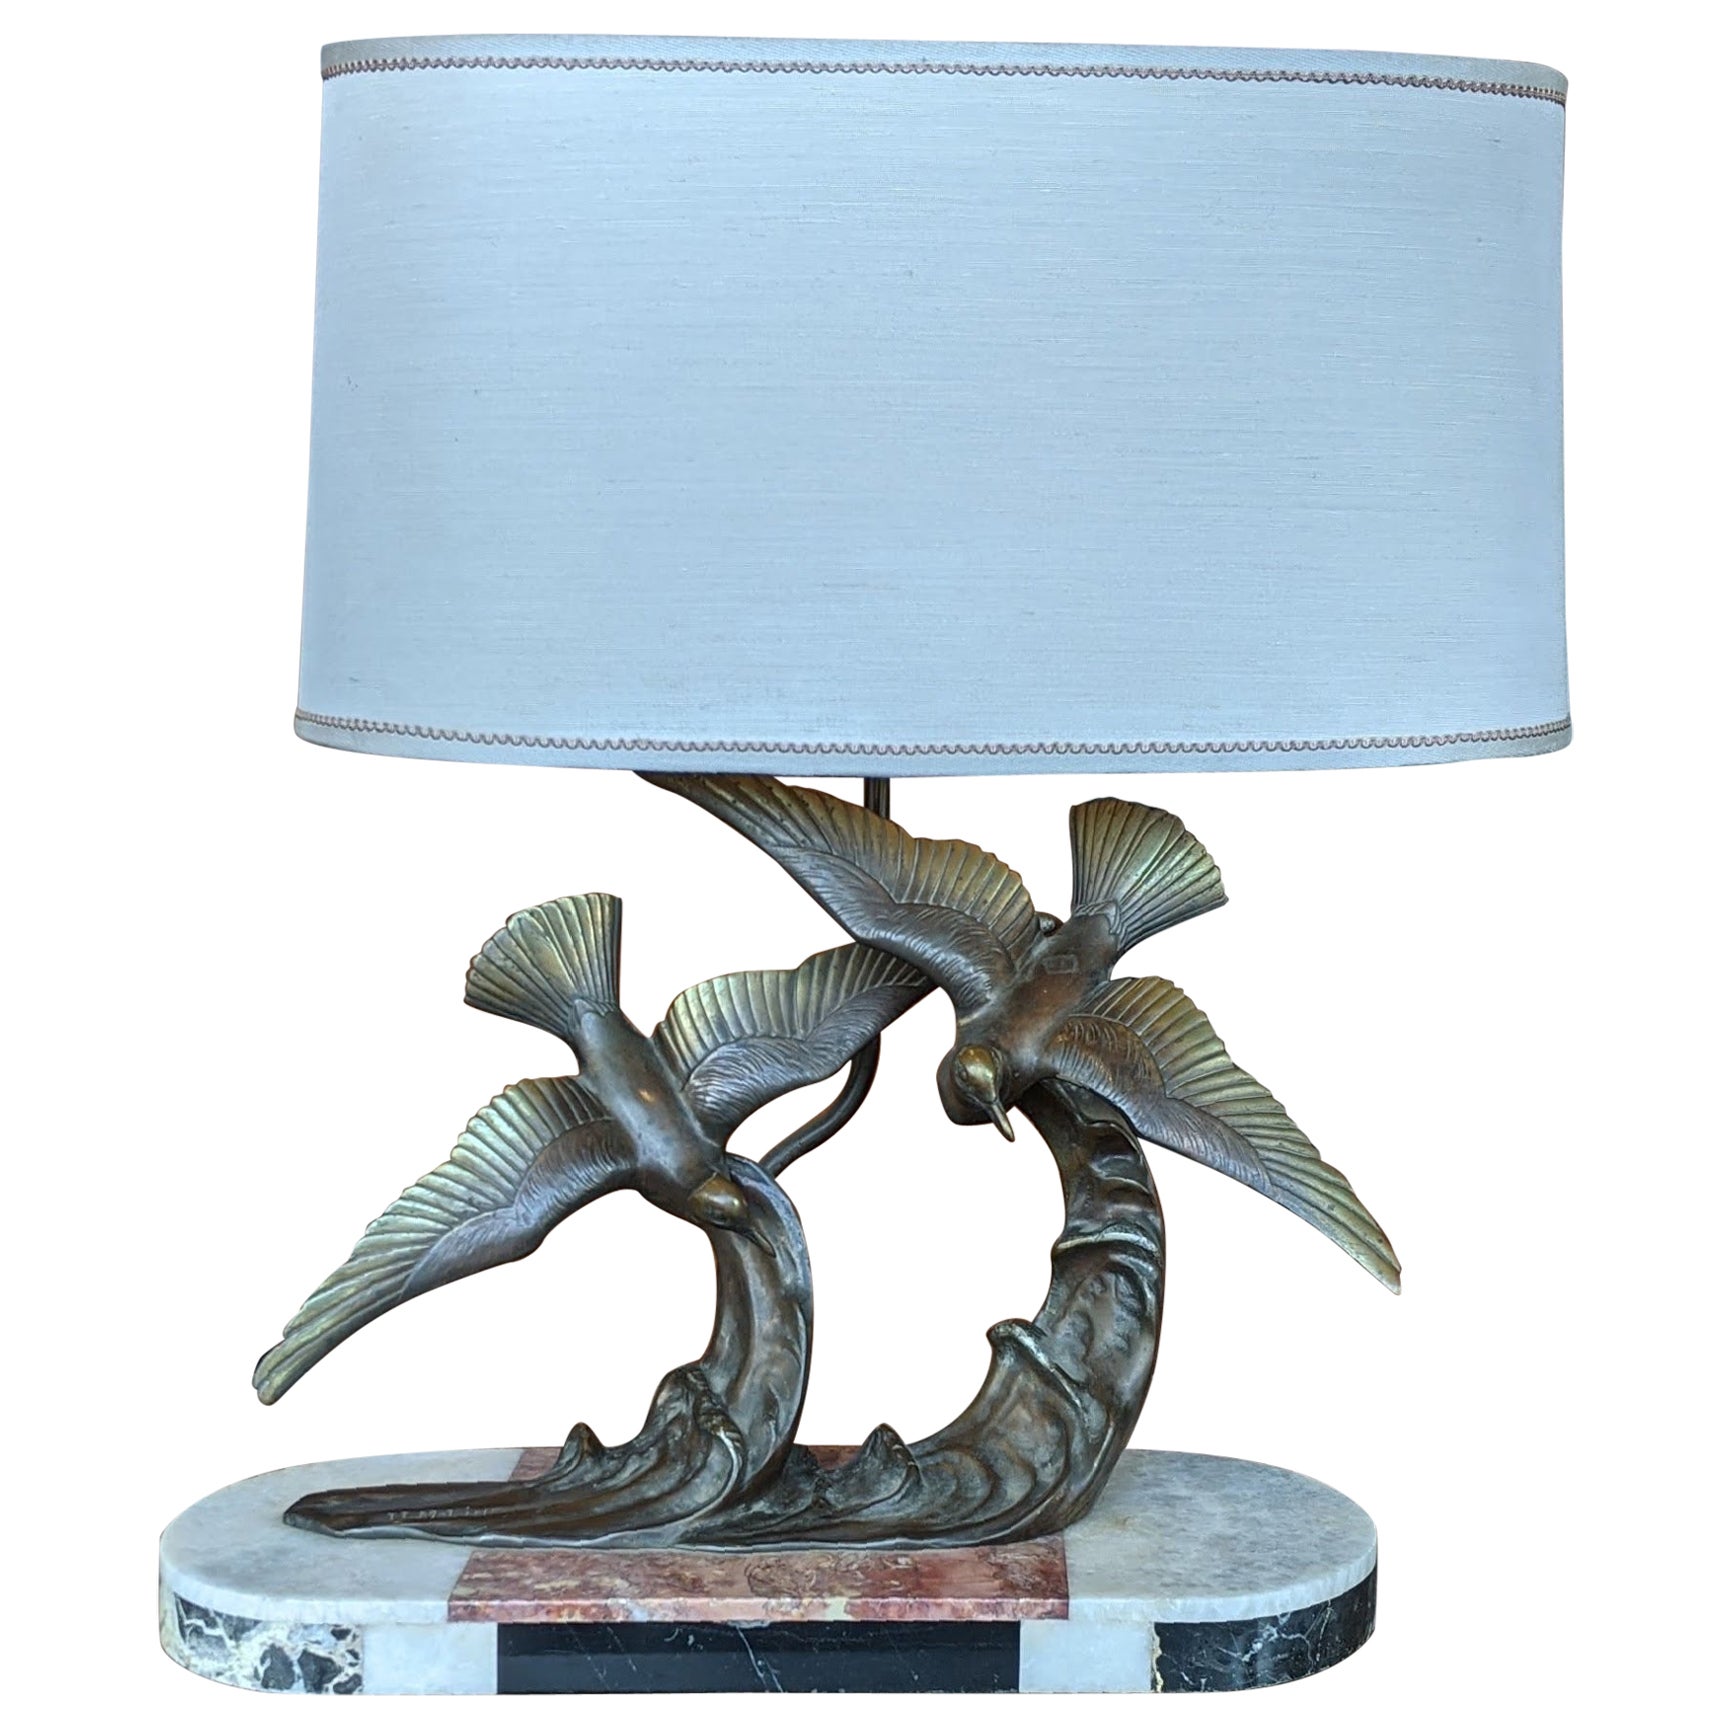 Art Deco Lamp with Sculpted Seagulls, H. Molins, Bronze and Marble For Sale